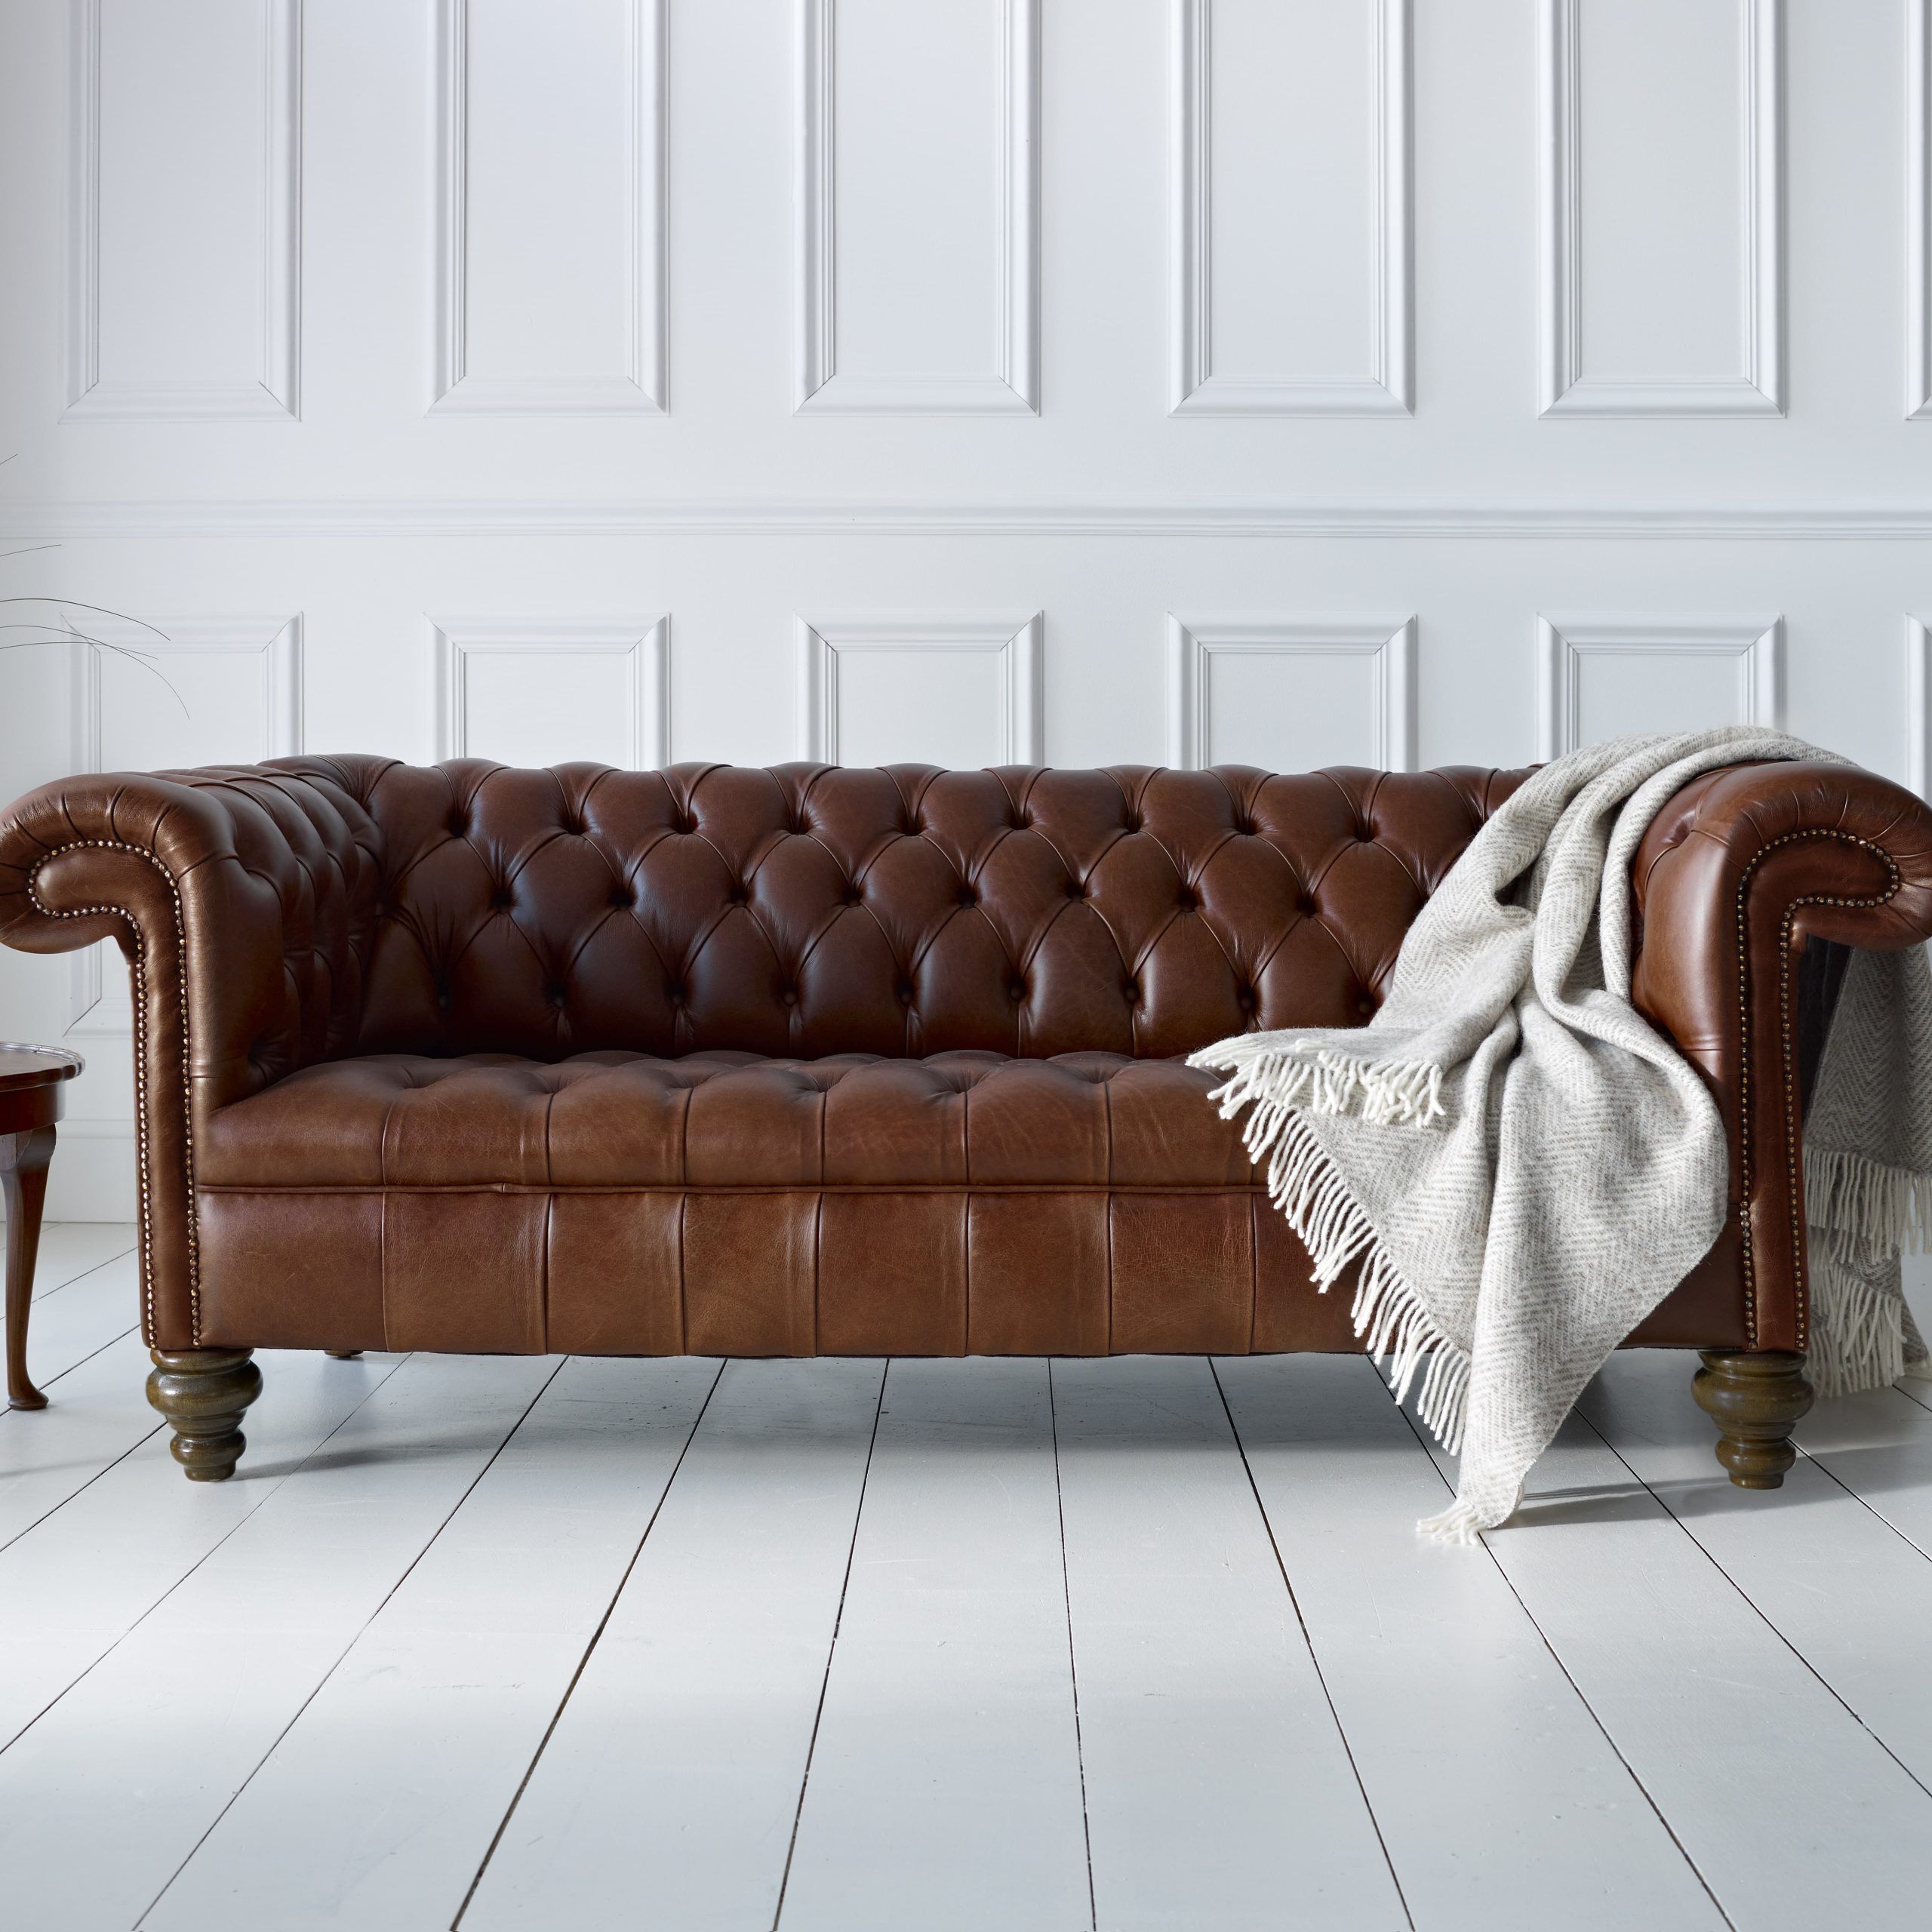 What Makes A Sofa A Chesterfield Sofa? – The Chesterfield Company Within Chesterfield Sofas (View 3 of 21)